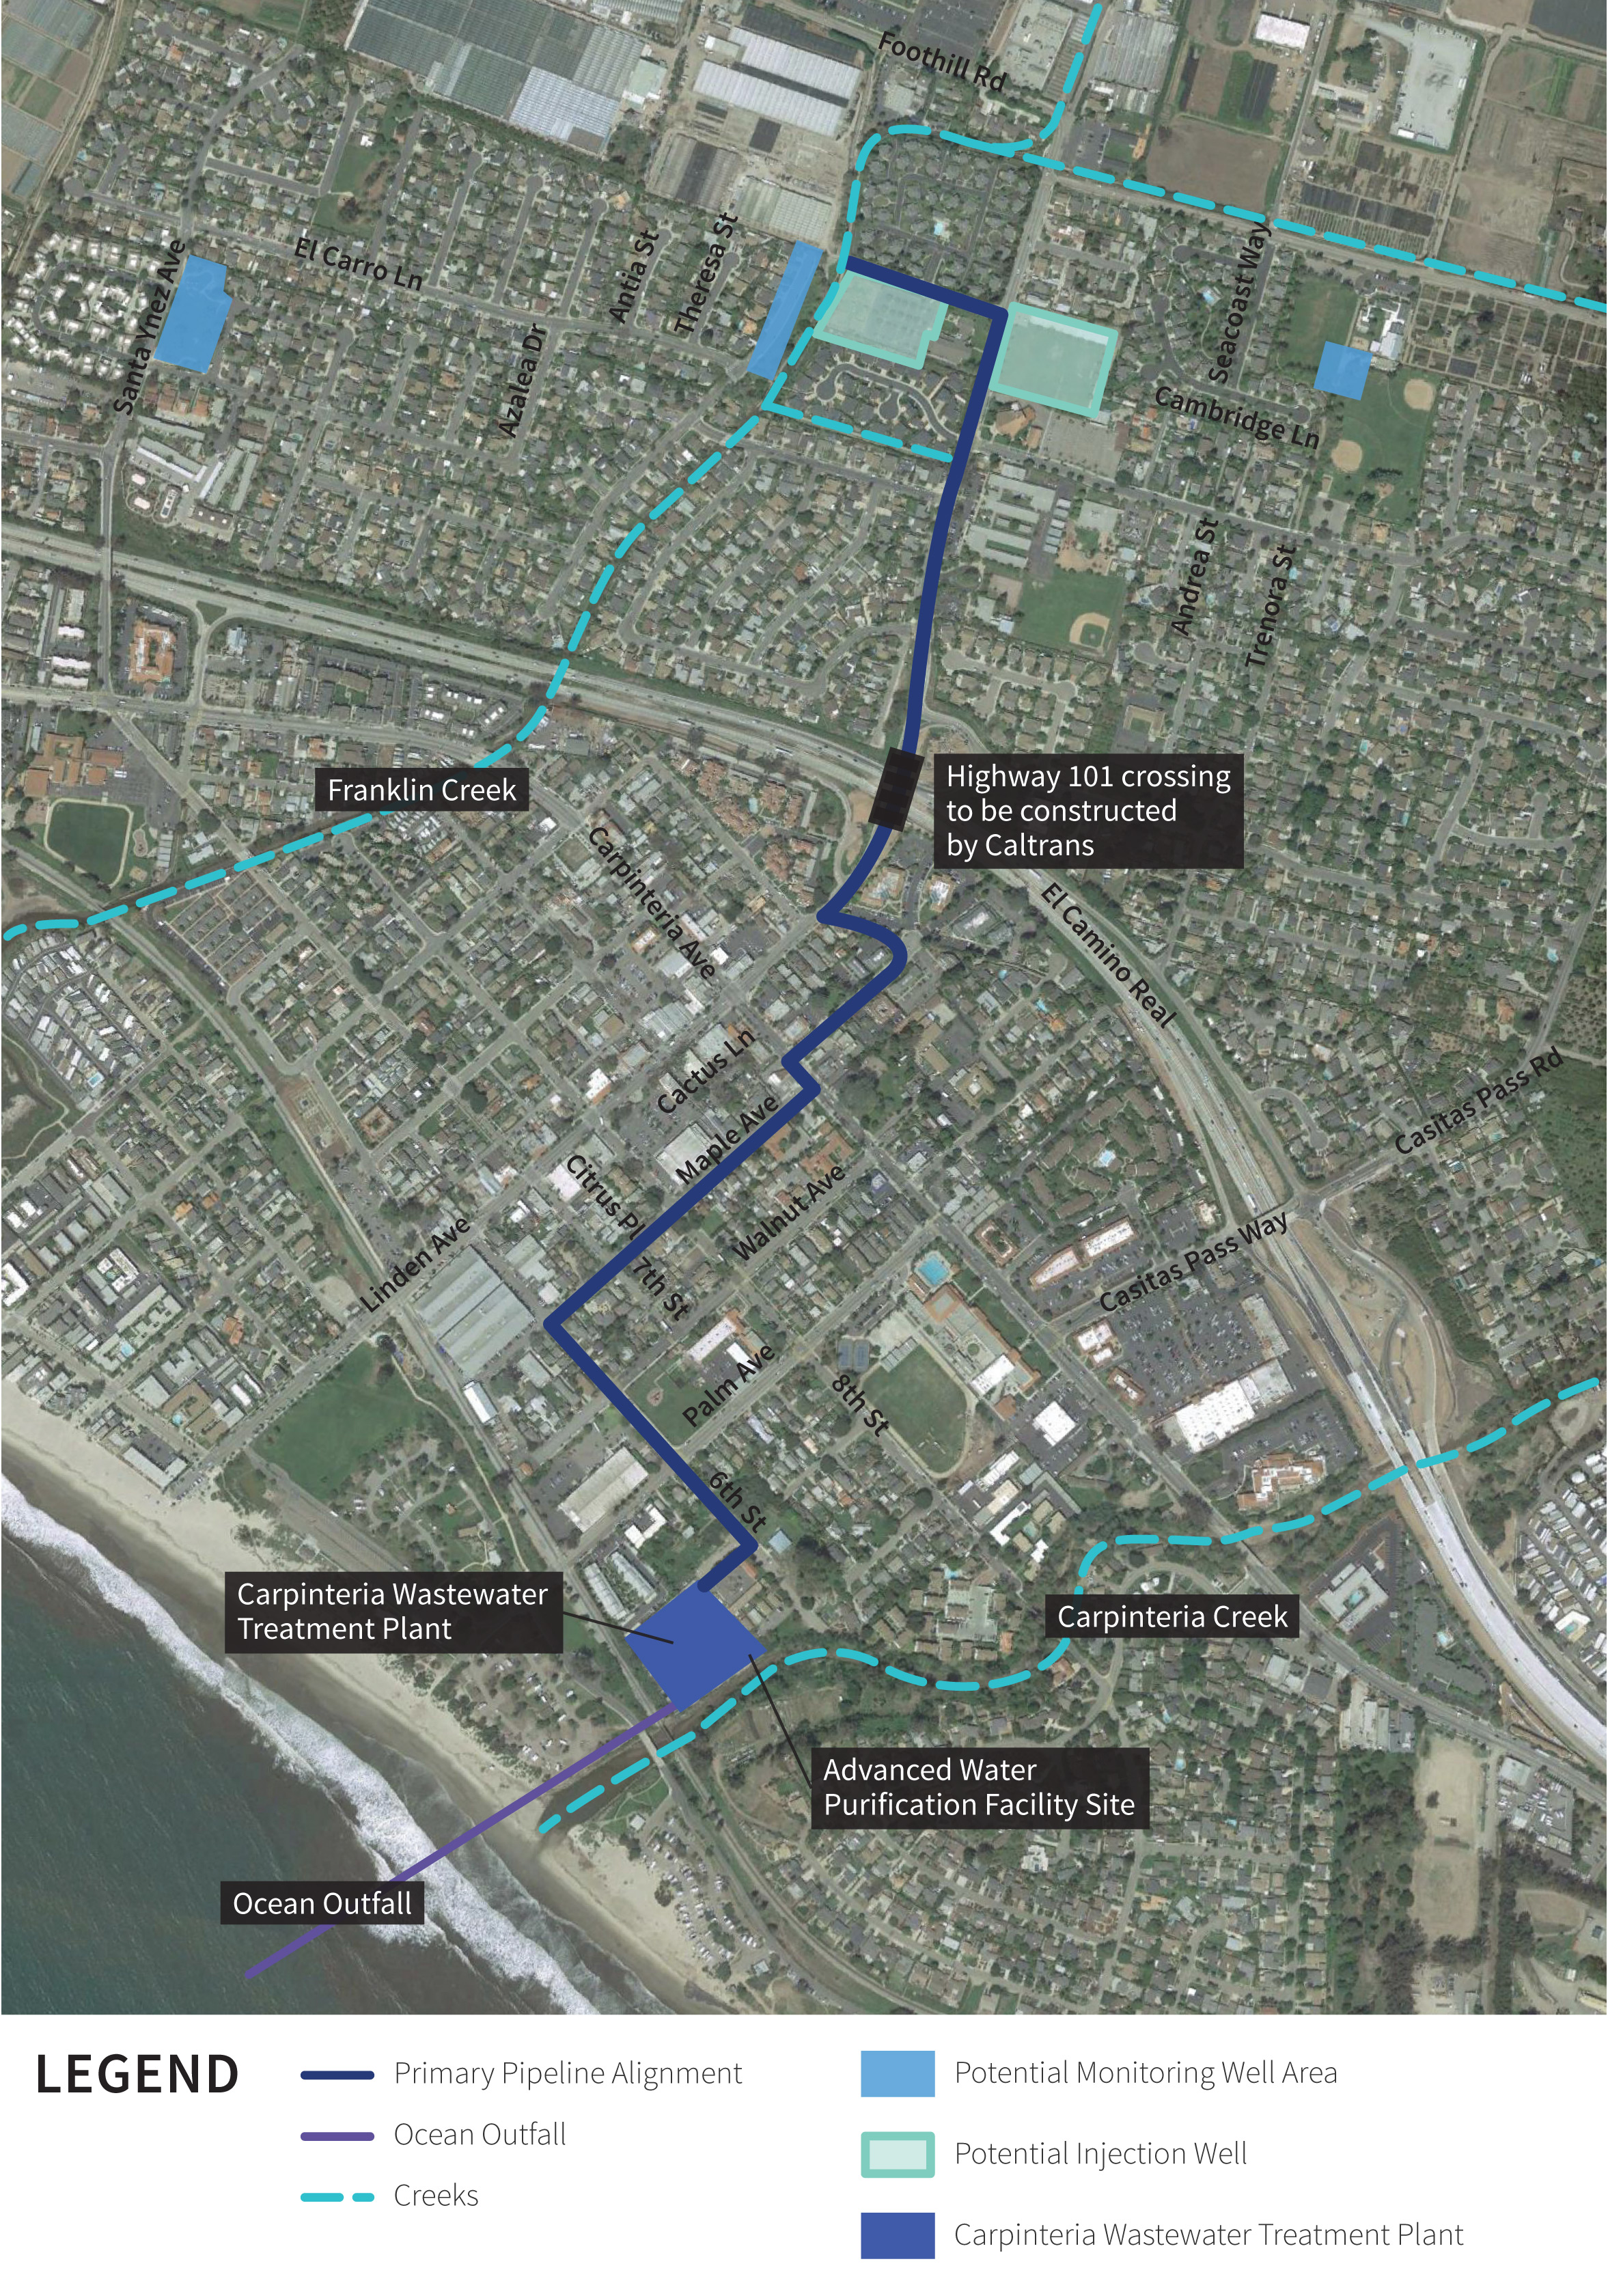 A map of the project and its features: Carpinteria Wastewater Treatment Plant located near the ocean and the Advanced Water Purification Facility Site on the same property; a primary pipeline alignment that runs from the Purification Facility across town and under the freeway to spreading grounds; an alternative pipeline alighment with various paths through town; potential monitoring well area, potential injection well; Carpinteria Creek that runs alongside the Advanced Water Purification Facility; and an existing ocean outfall.